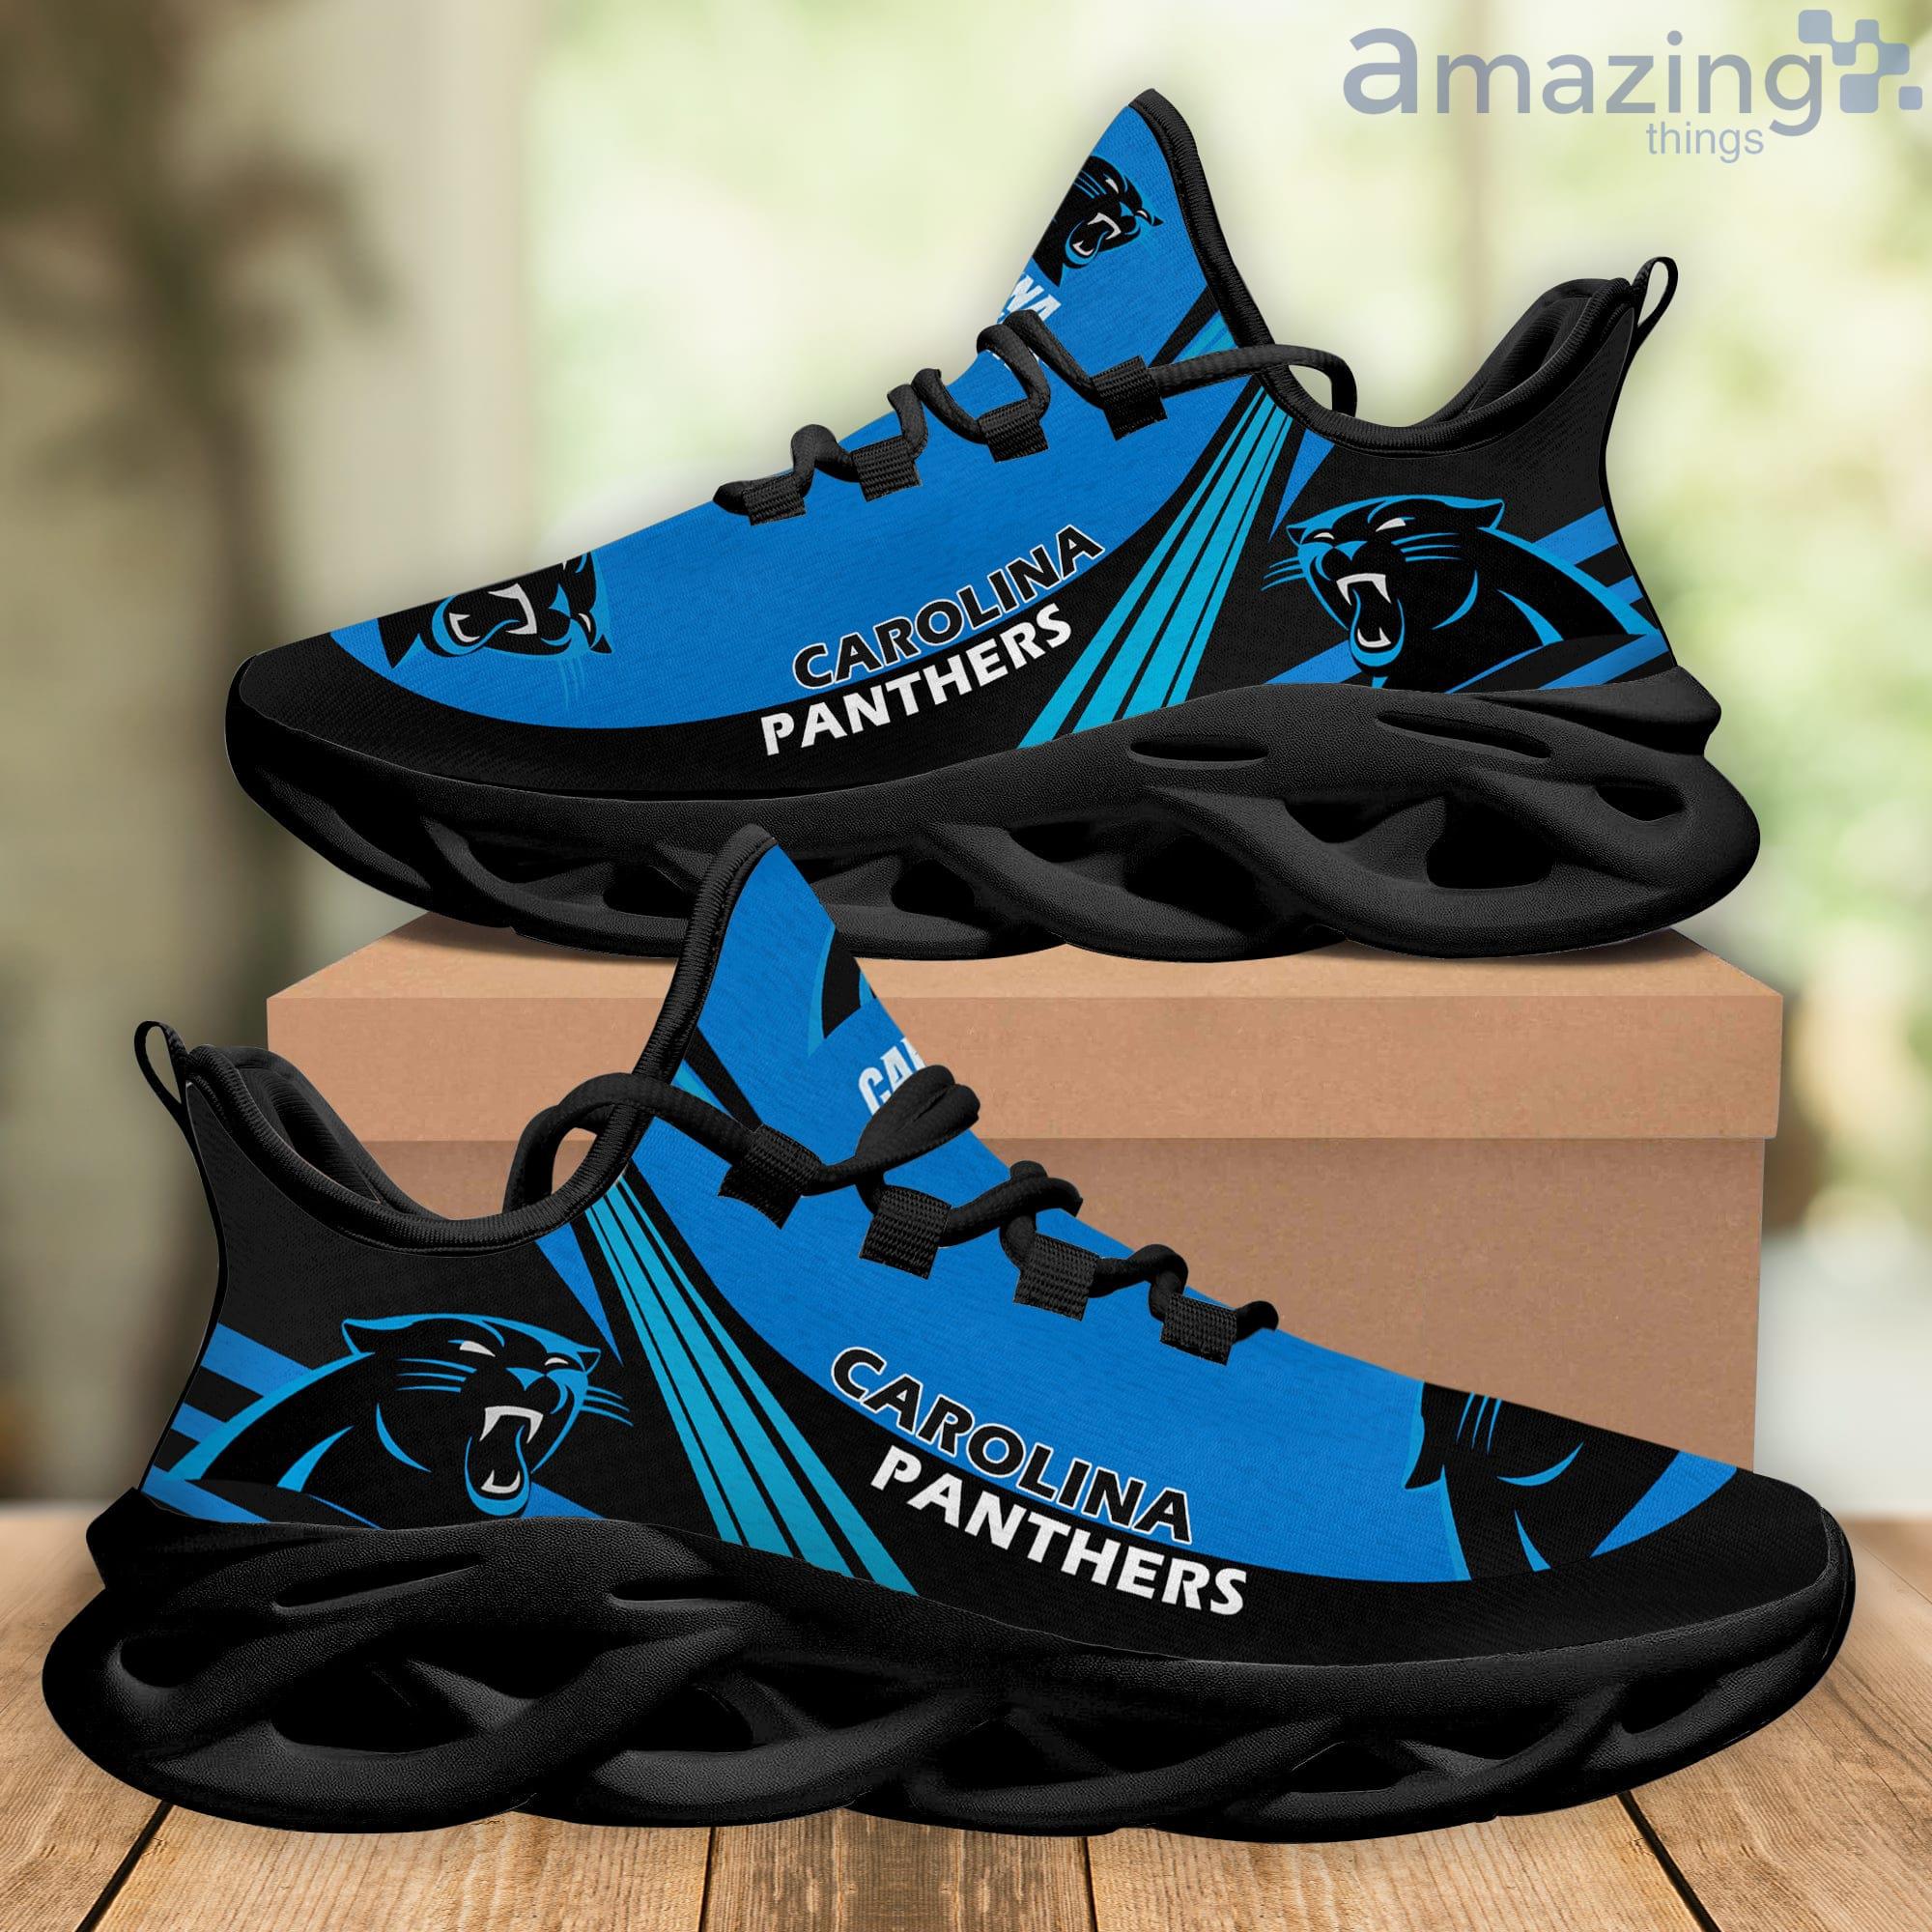 Carolina Panthers Casual 3D Max Soul Shoes Running Shoes For Men And Women